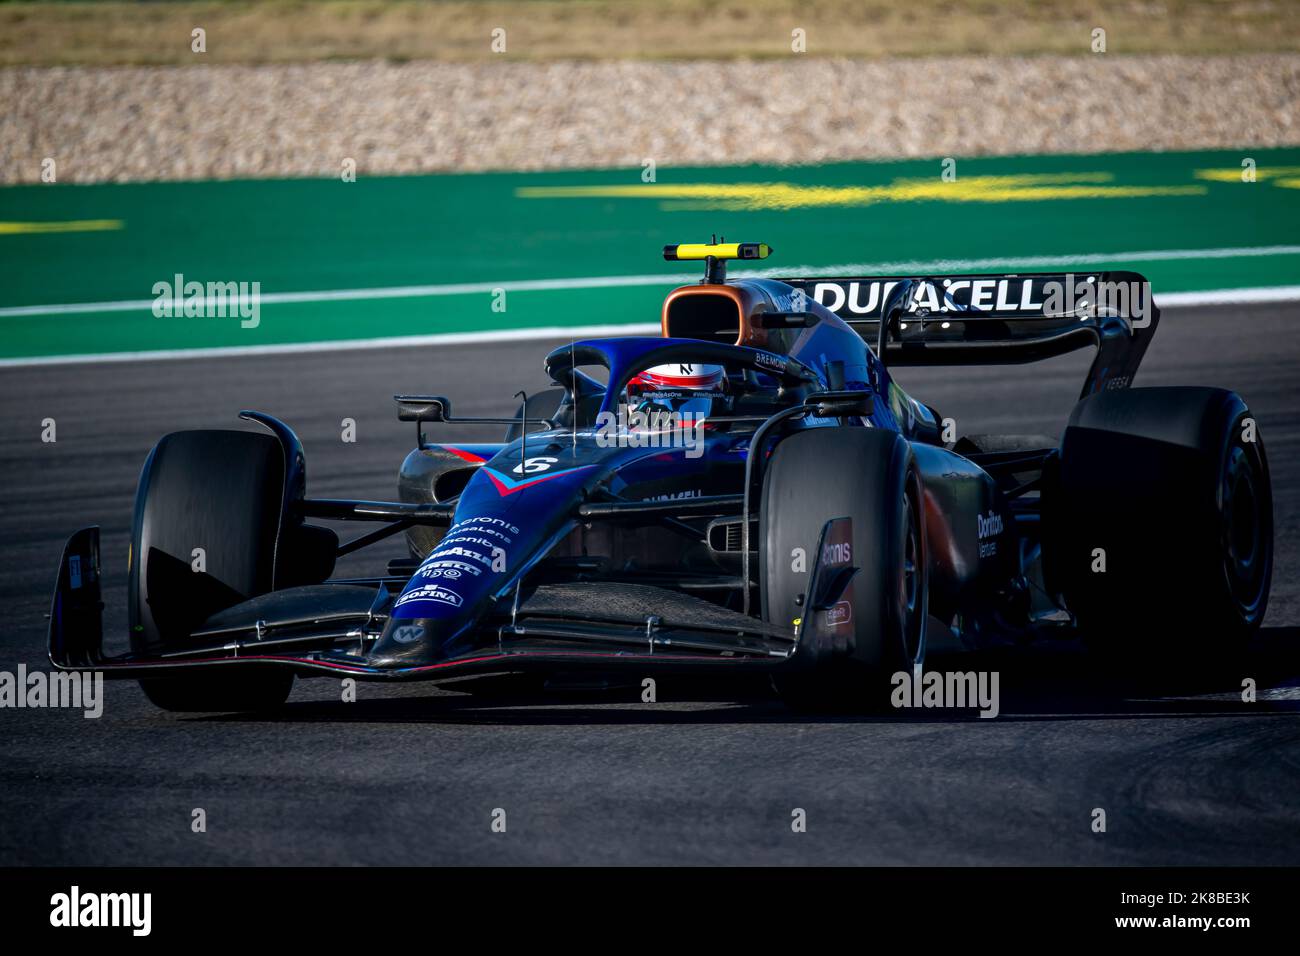 Austin, Texas, United States, 22nd Oct 2022, Nicholas Latifi, from Canada competes for Williams Racing. Practice, round 19 of the 2022 Formula 1 championship. Credit: Michael Potts/Alamy Live News Stock Photo